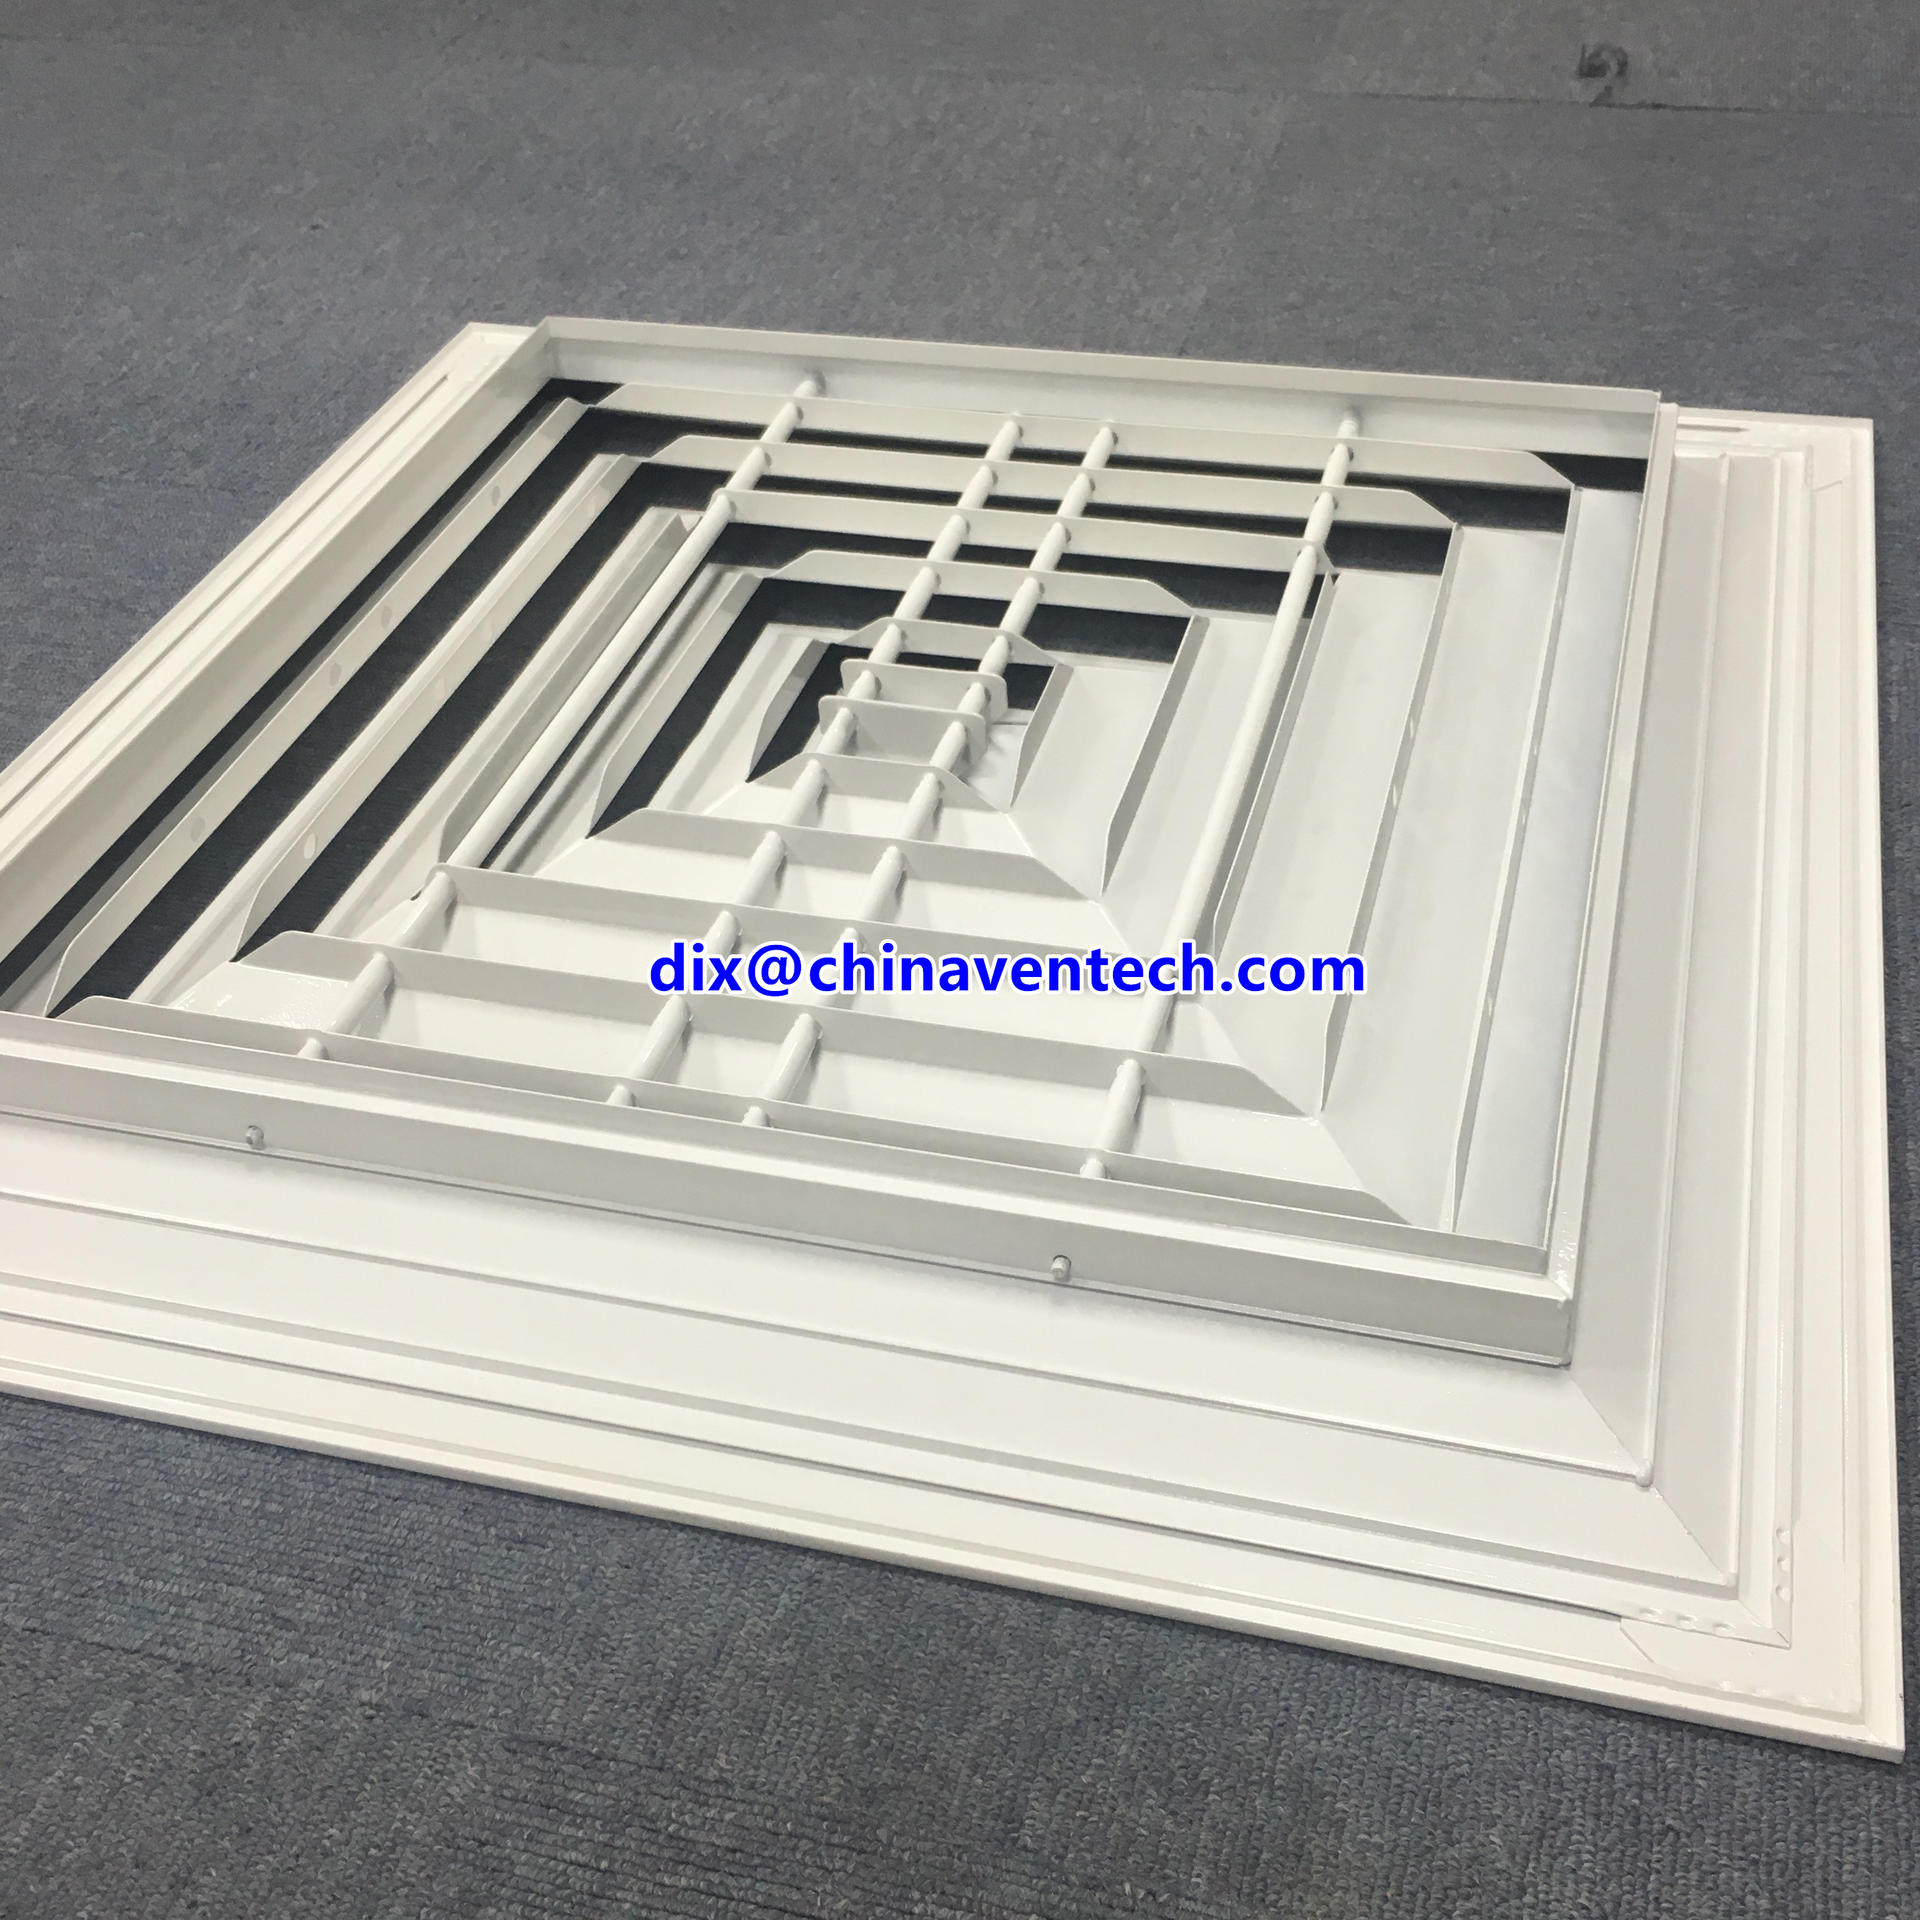 Hvac air conditioning systems adjustable air volume square ceiling 4 way diffuser